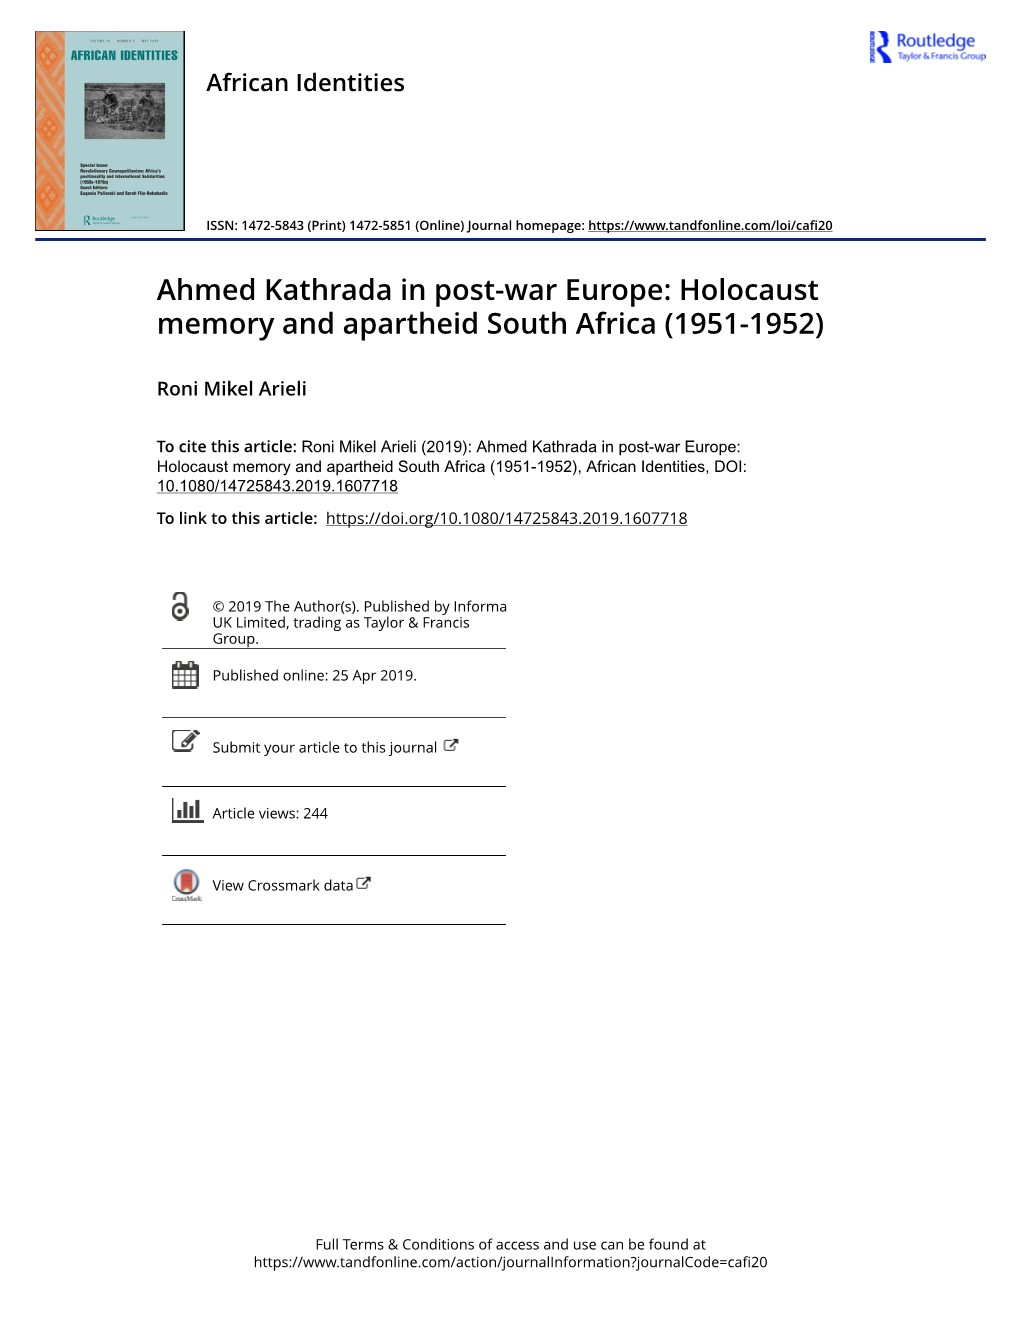 Holocaust Memory and Apartheid South Africa (1951-1952)